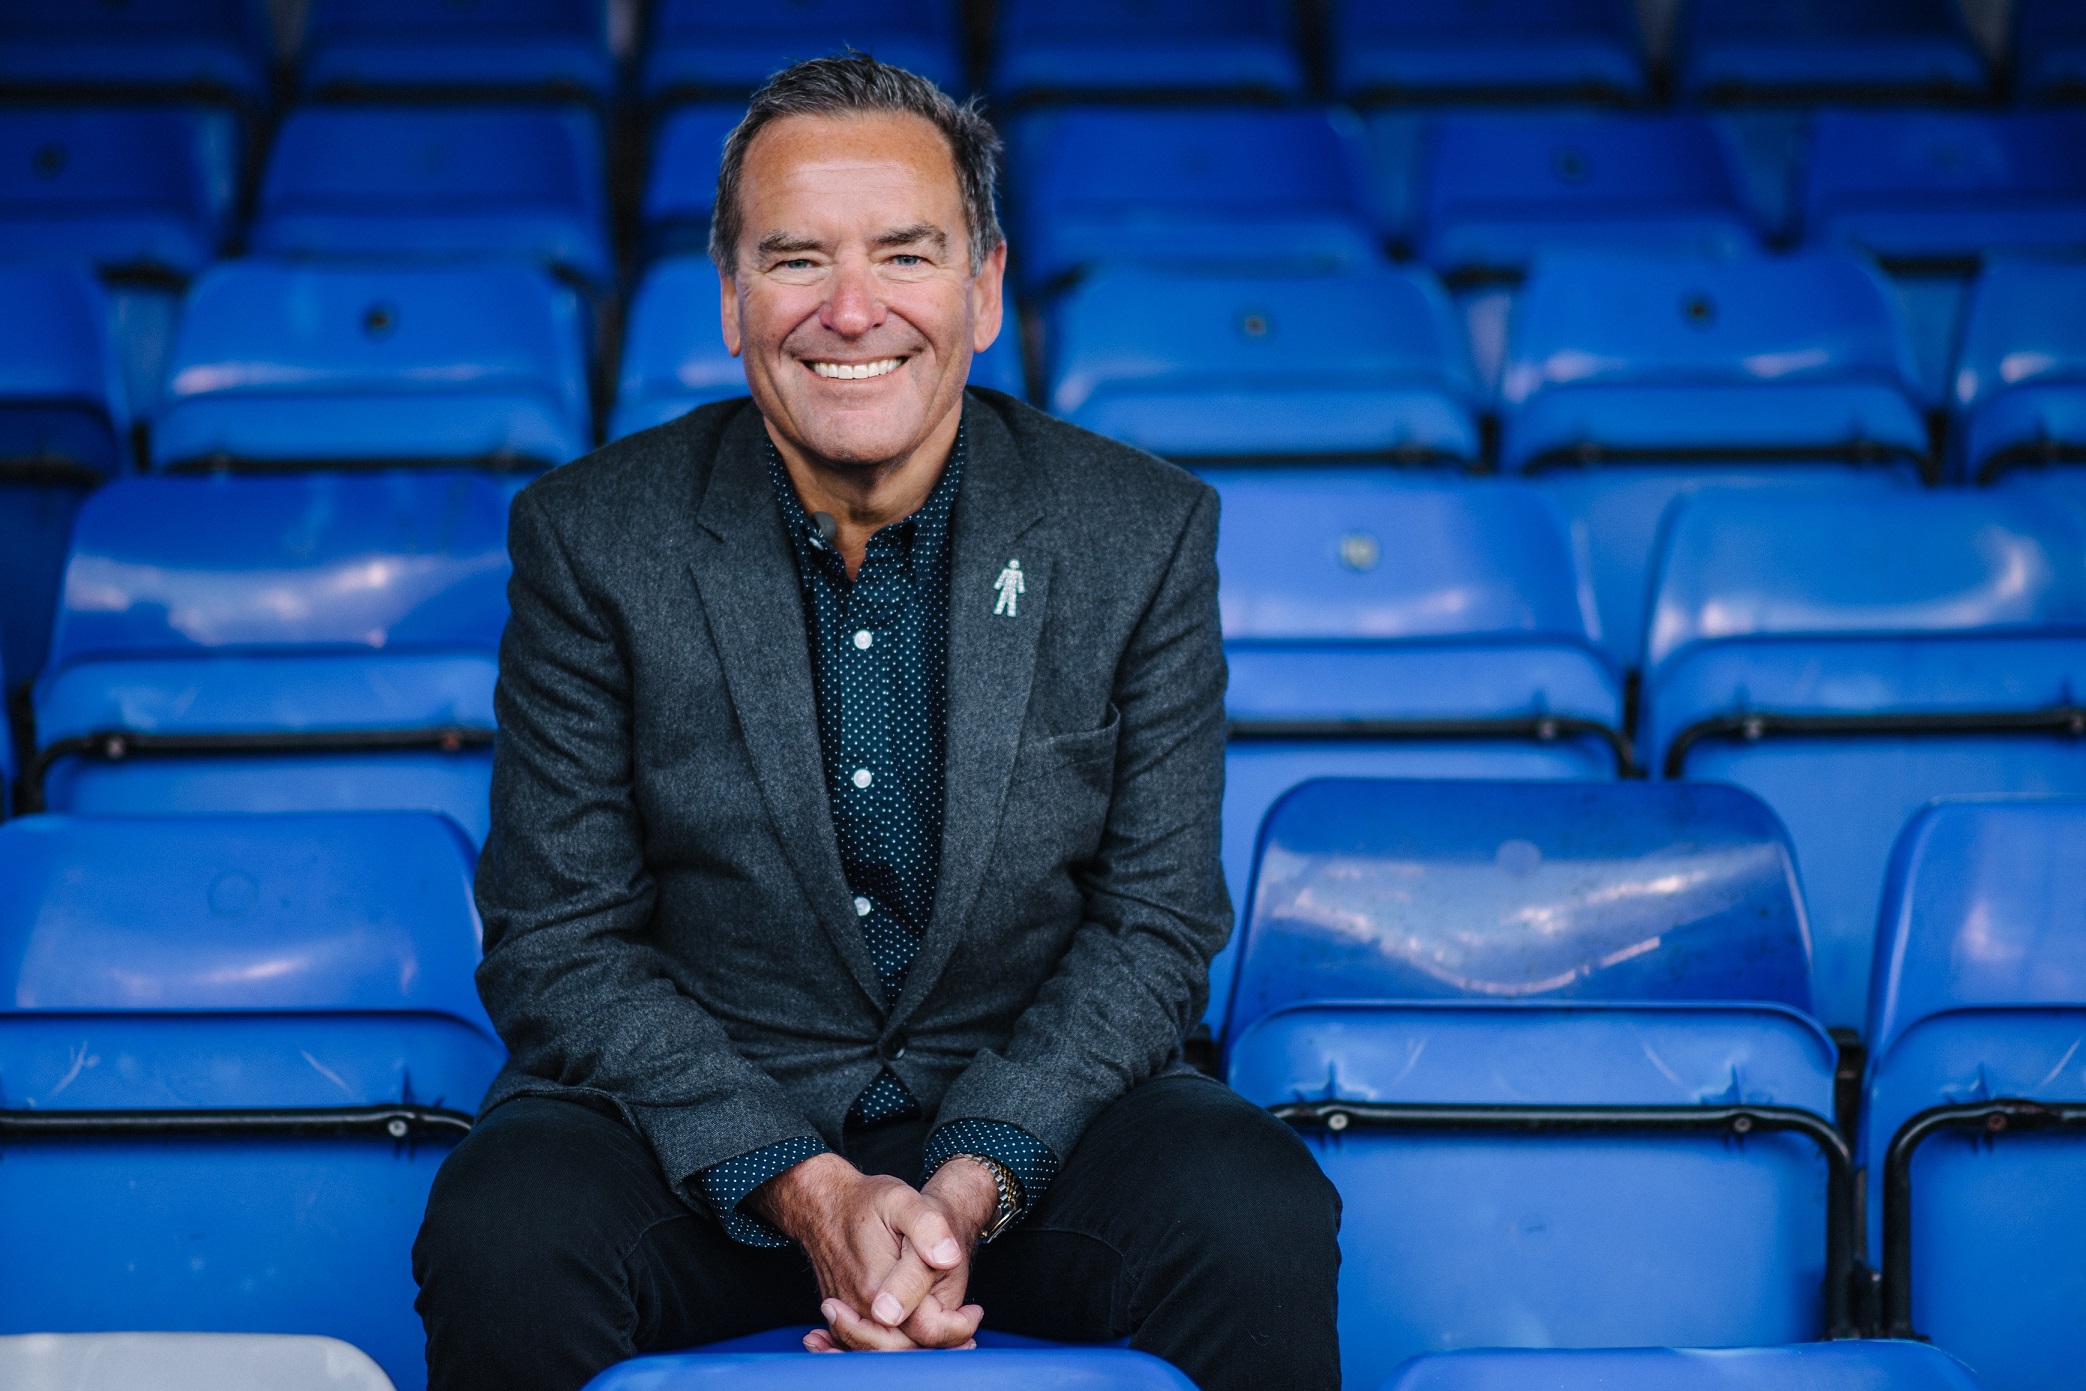 Jeff Stelling pictured wearing the charity's 'Man of Men' badge